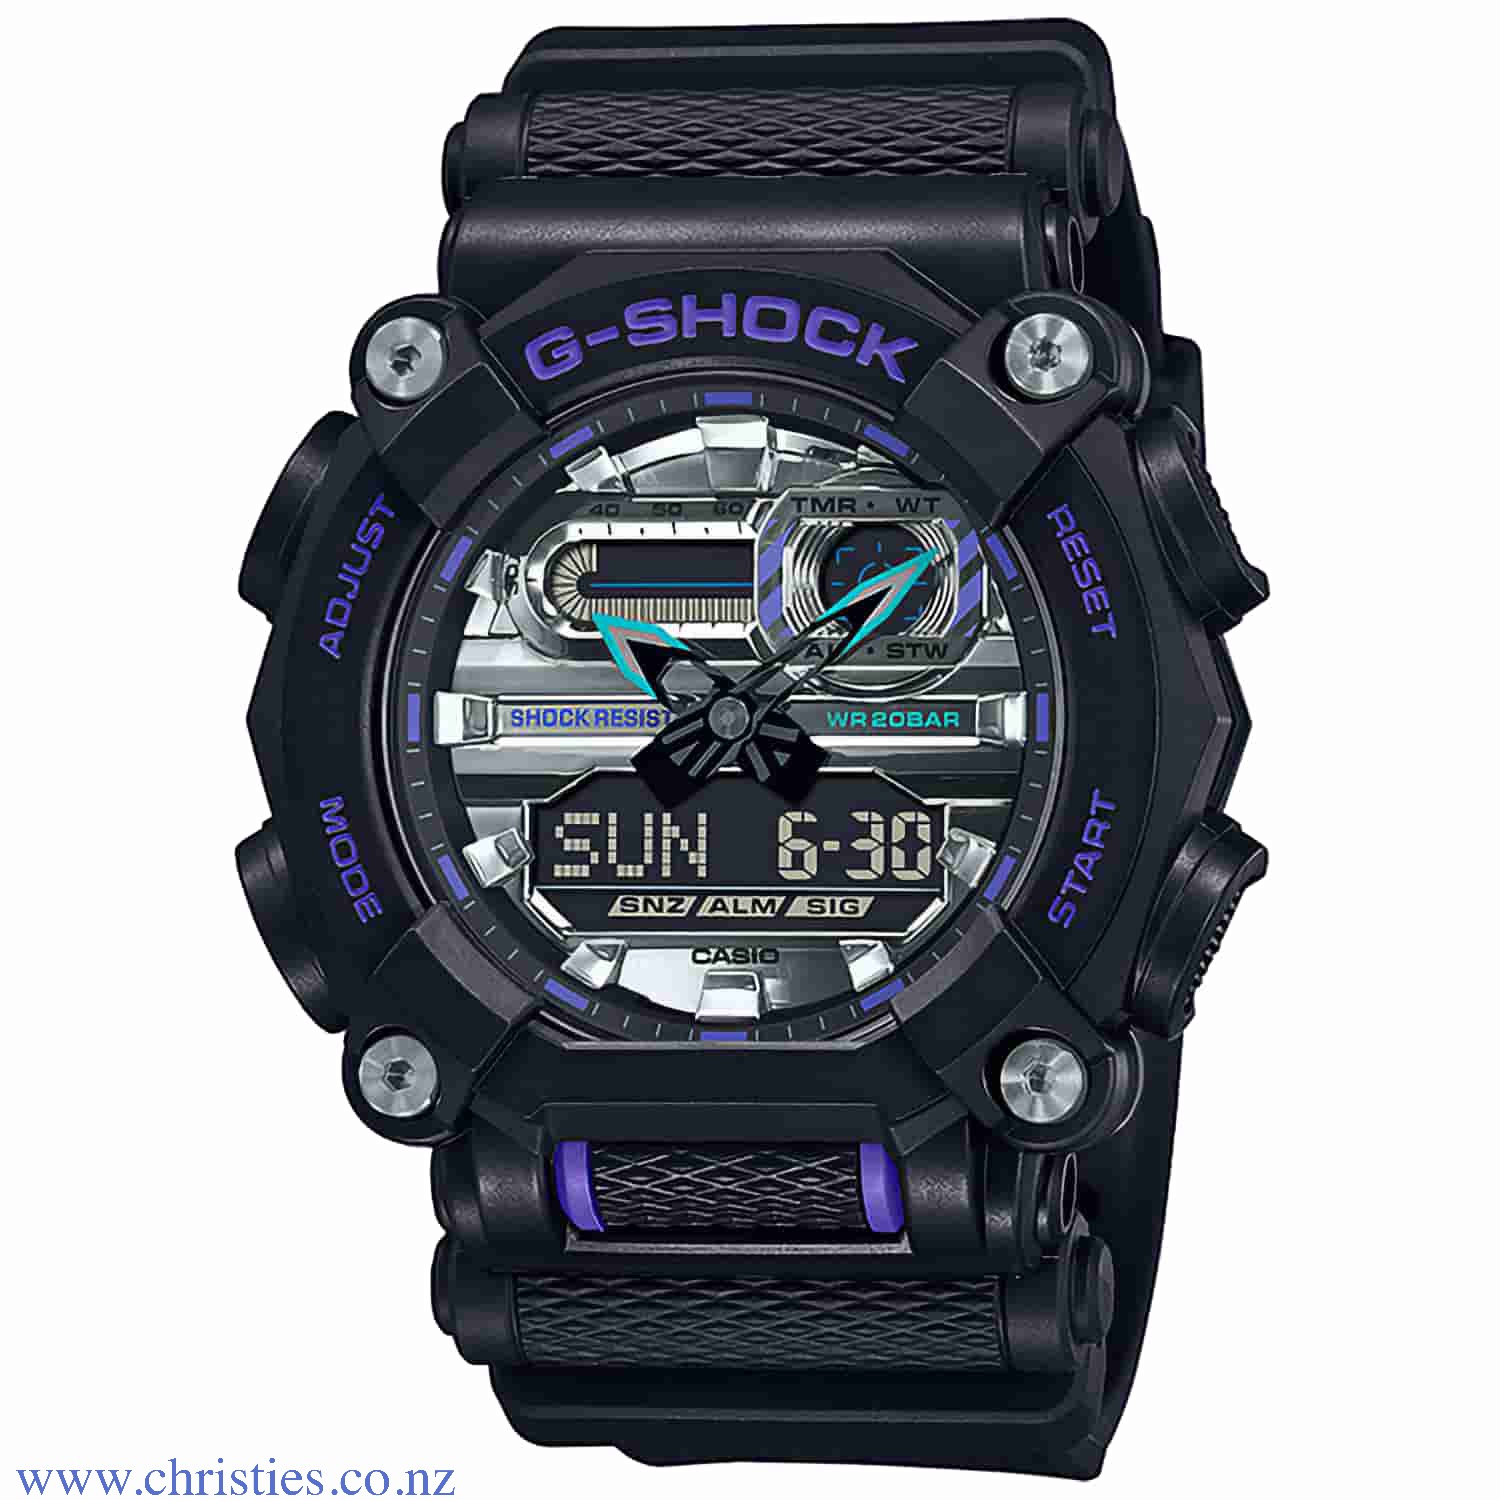 GA900AS-1A Casio G-Shock Watch. GA-900 Exceptional Colours - Turn heads and catch eyes with a G-SHOCK watch boasting a dazzling splash of colour. The design evokes an industrial feel with a 10-faceted bezel accented with four screws, evoking the nuts a G-